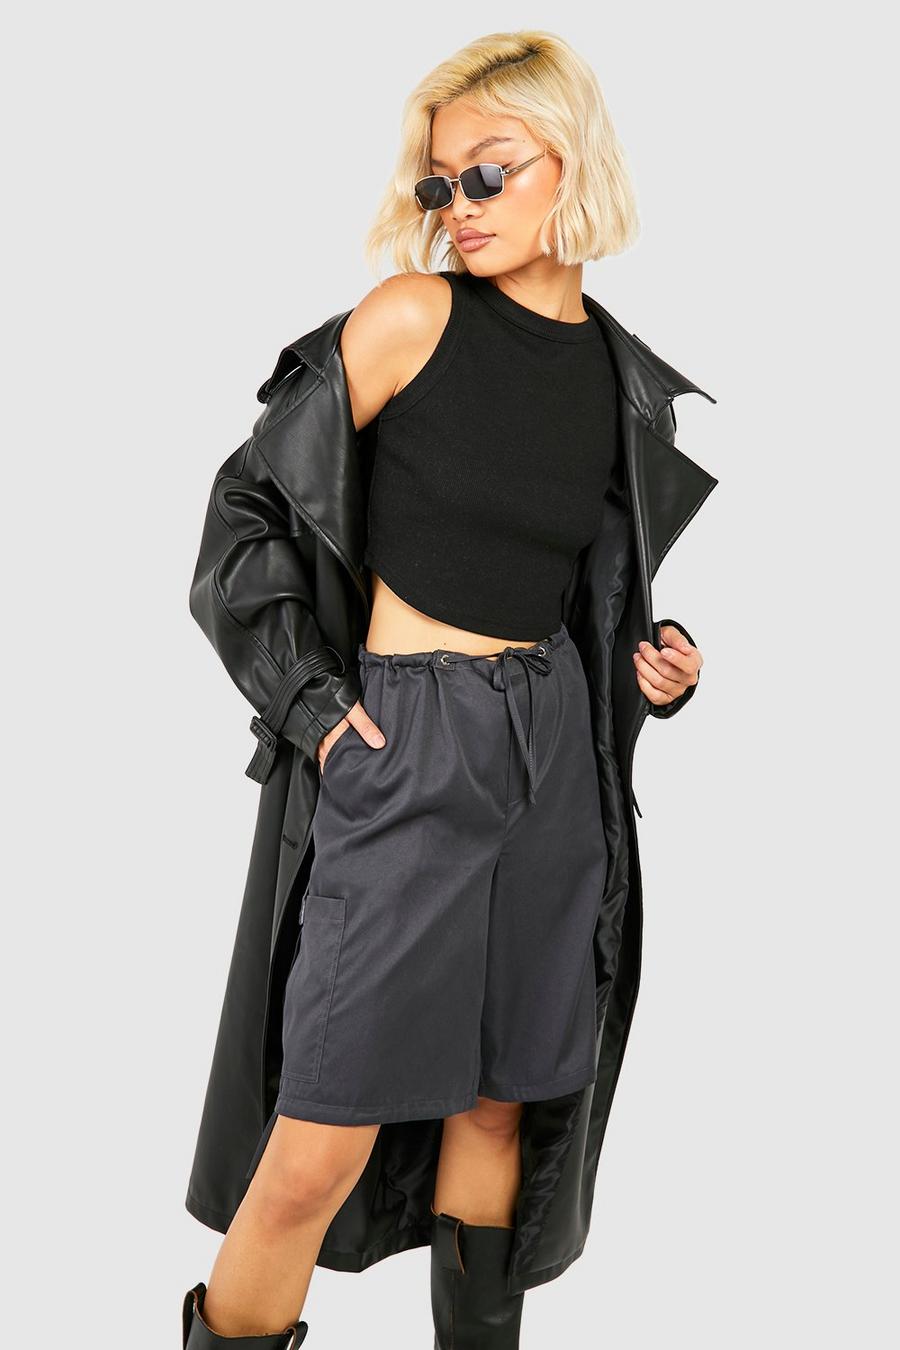 Charcoal Long Line Keperstof Parachute Shorts